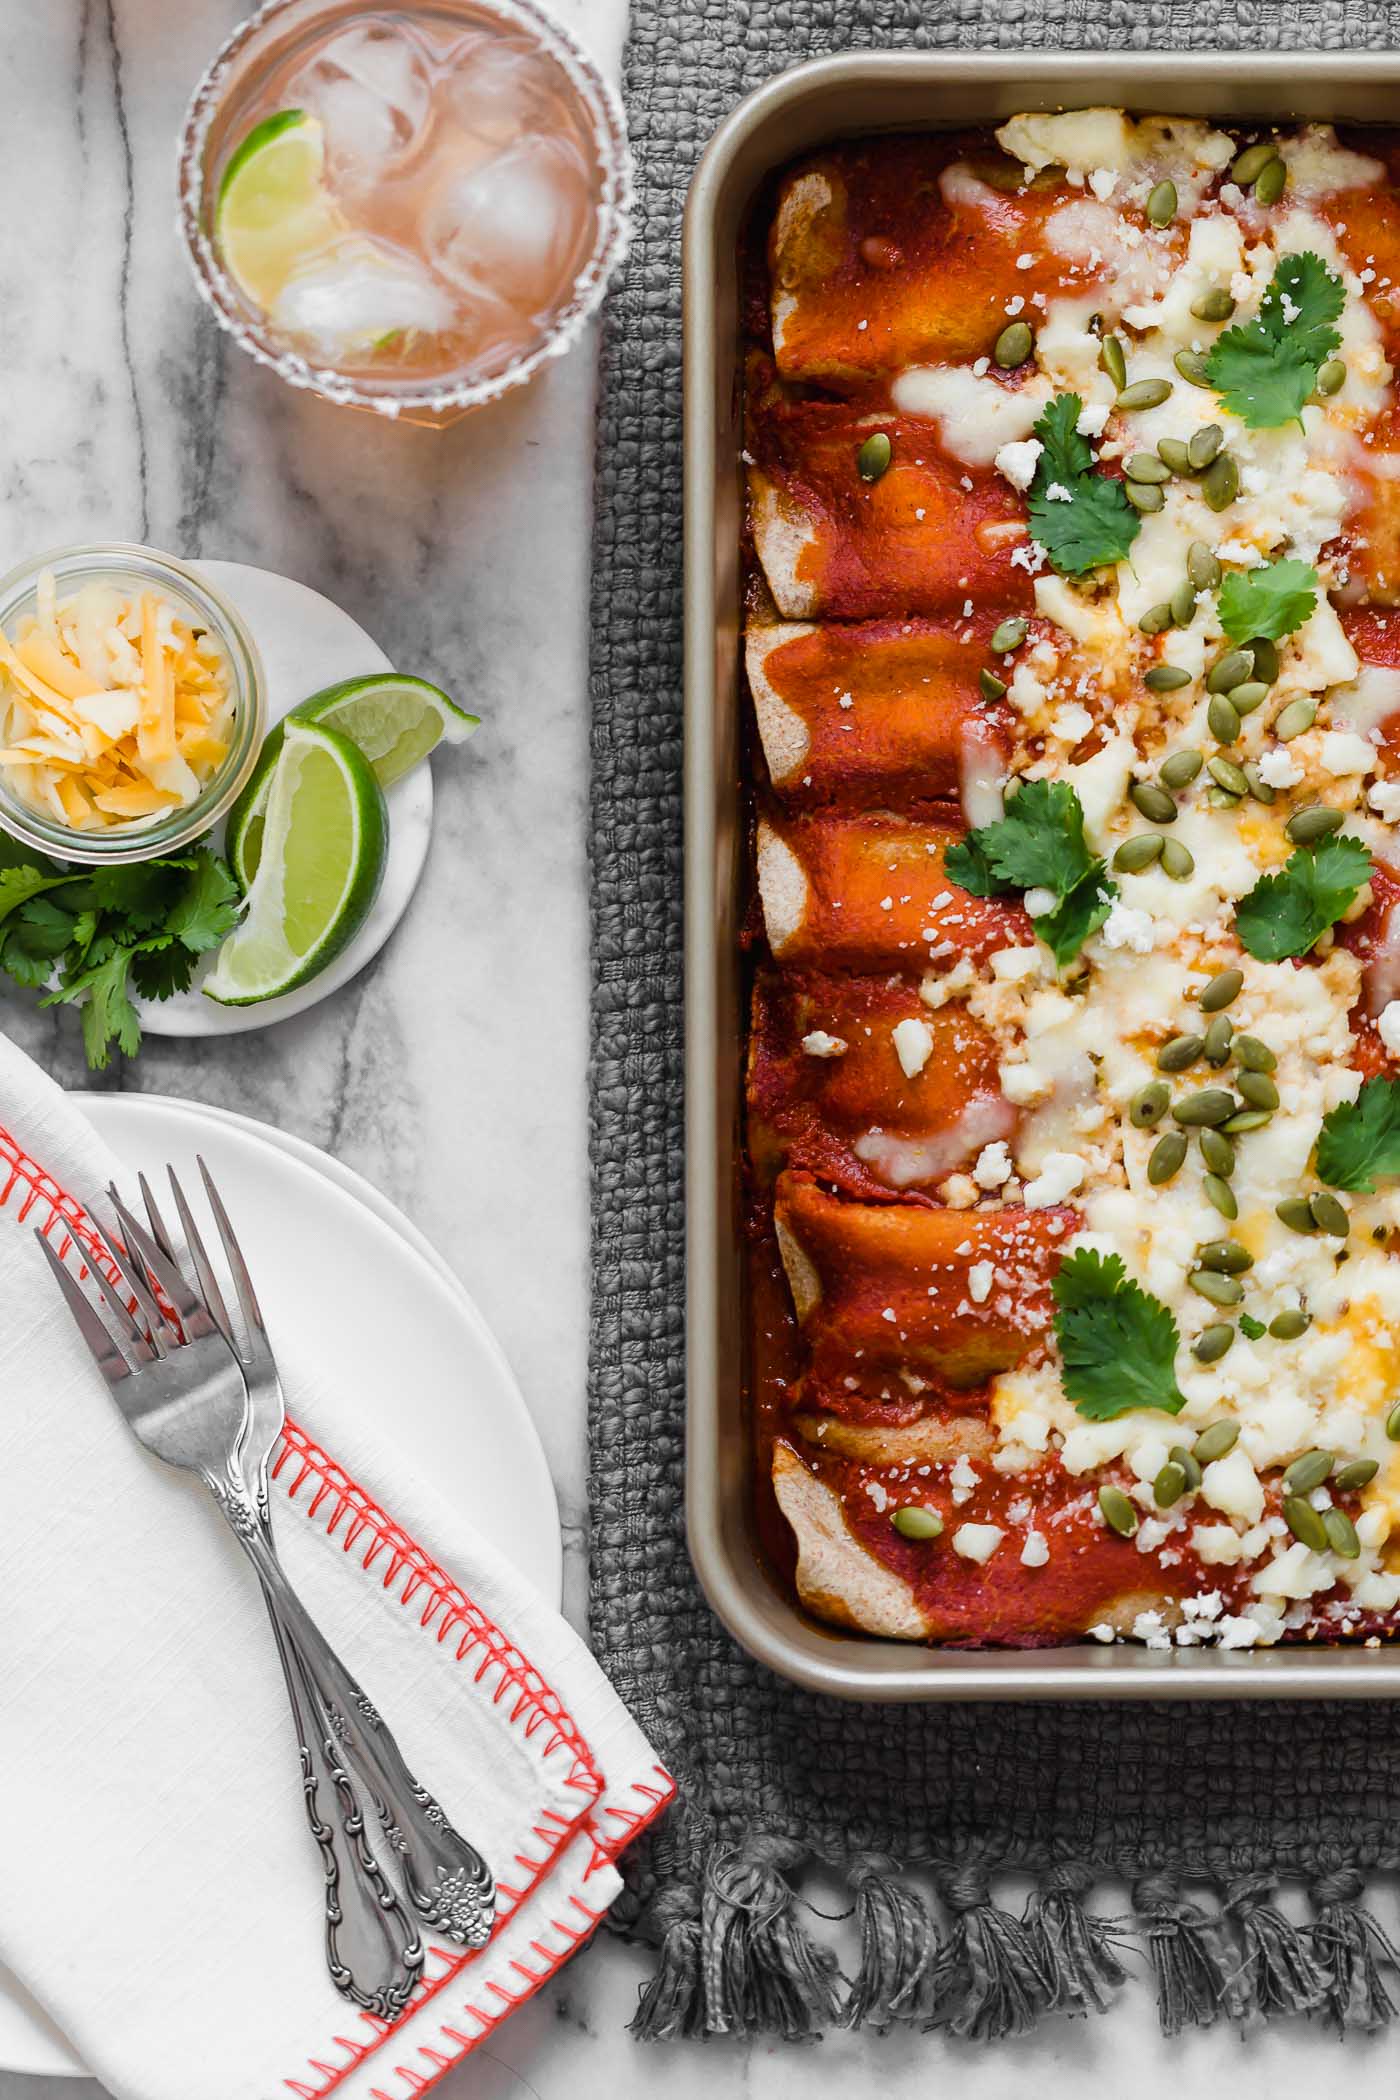 an easy & healthy chicken enchilada recipe perfect for weeknight cooking! these weeknight chicken enchiladas have a filling of pulled chicken, bell pepper sweet onion, black beans, & cheese, and get covered in the easiest blender enchilada sauce made from ancho chiles. the only thing missing is a couple of margaritas! #playswellwithbutter #easychickenenchiladas #healthyenchiladas #mexicanfoodrecipes #homemadenchiladasauce #enchiladasaucerecipe